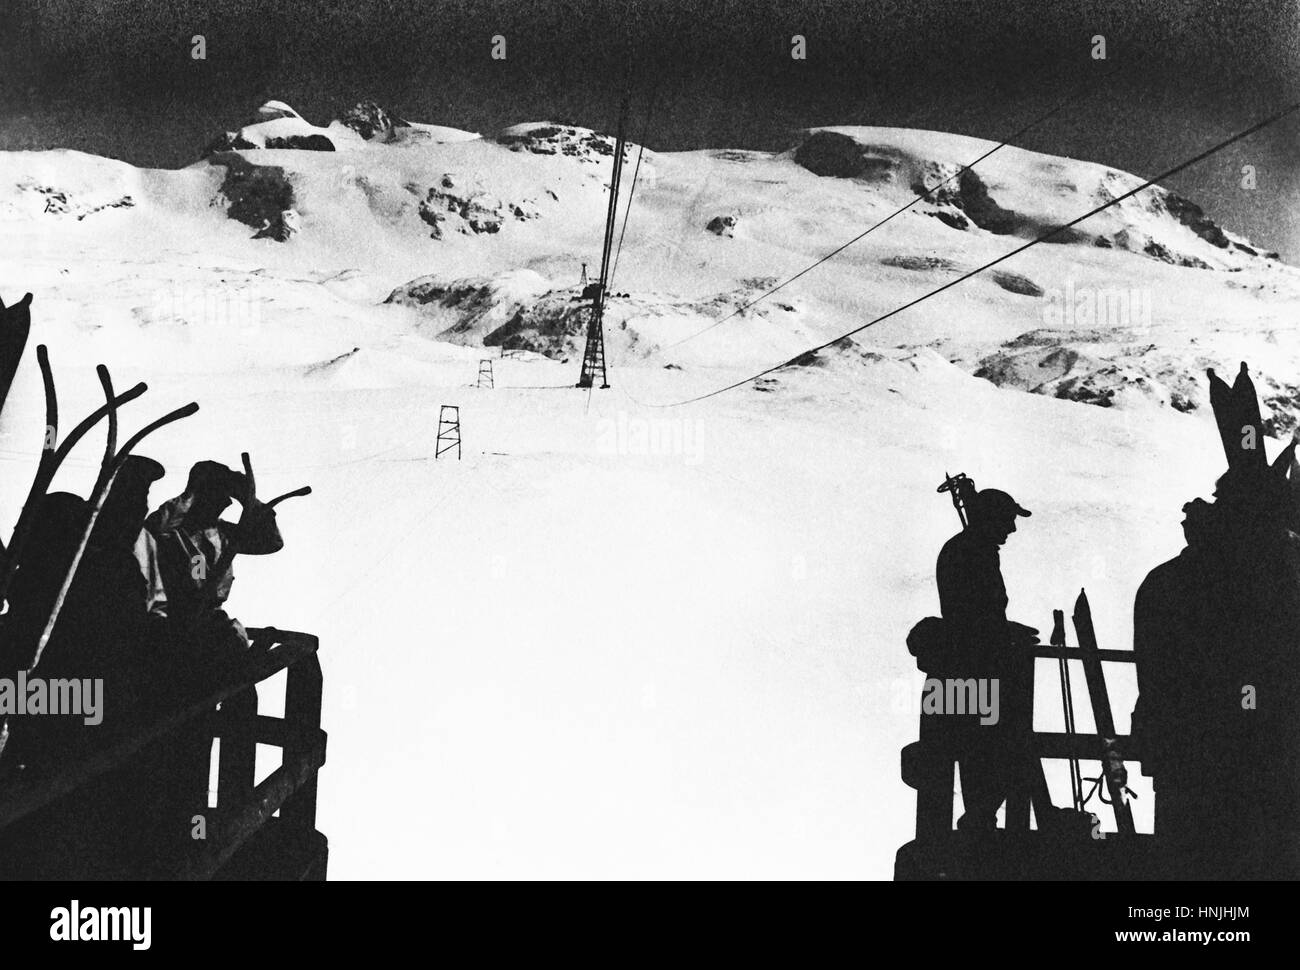 Dolomites,Italy 1939 - Backlight with skier silhouettes, waiting for the teleferic on Dolomites mountains, Italy. Scan from analog photography, private family collection before WWII. Stock Photo